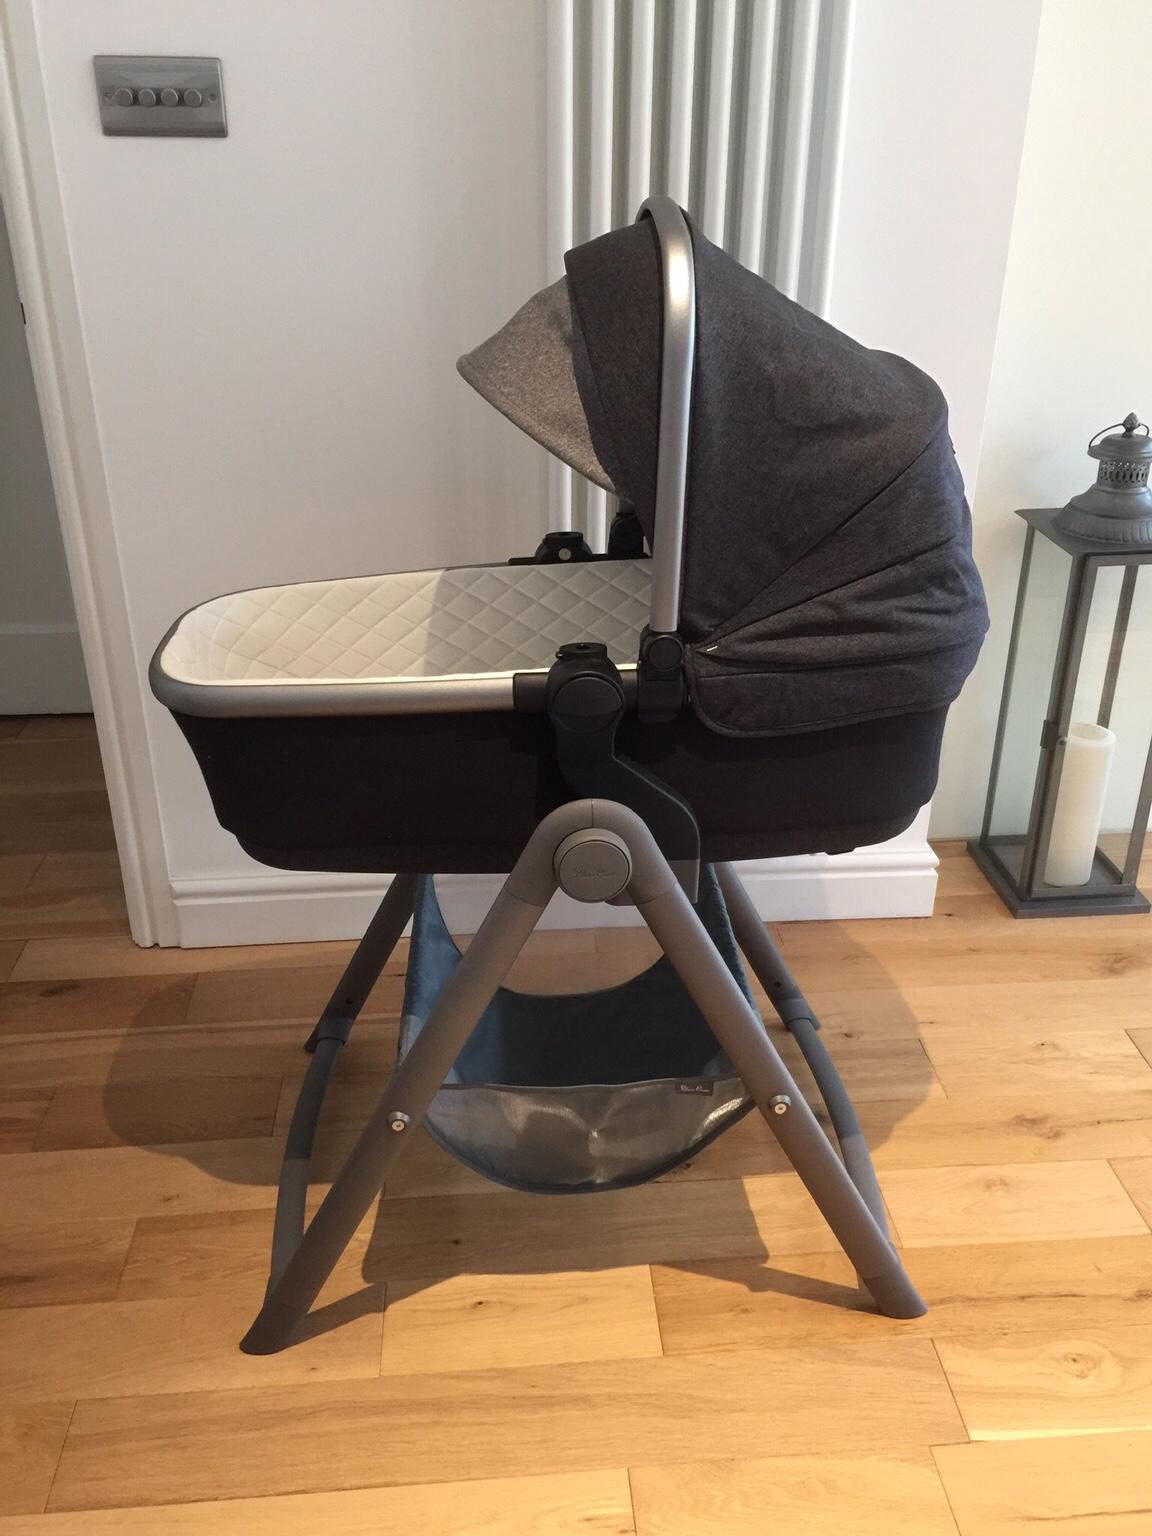 silver cross bassinet stand